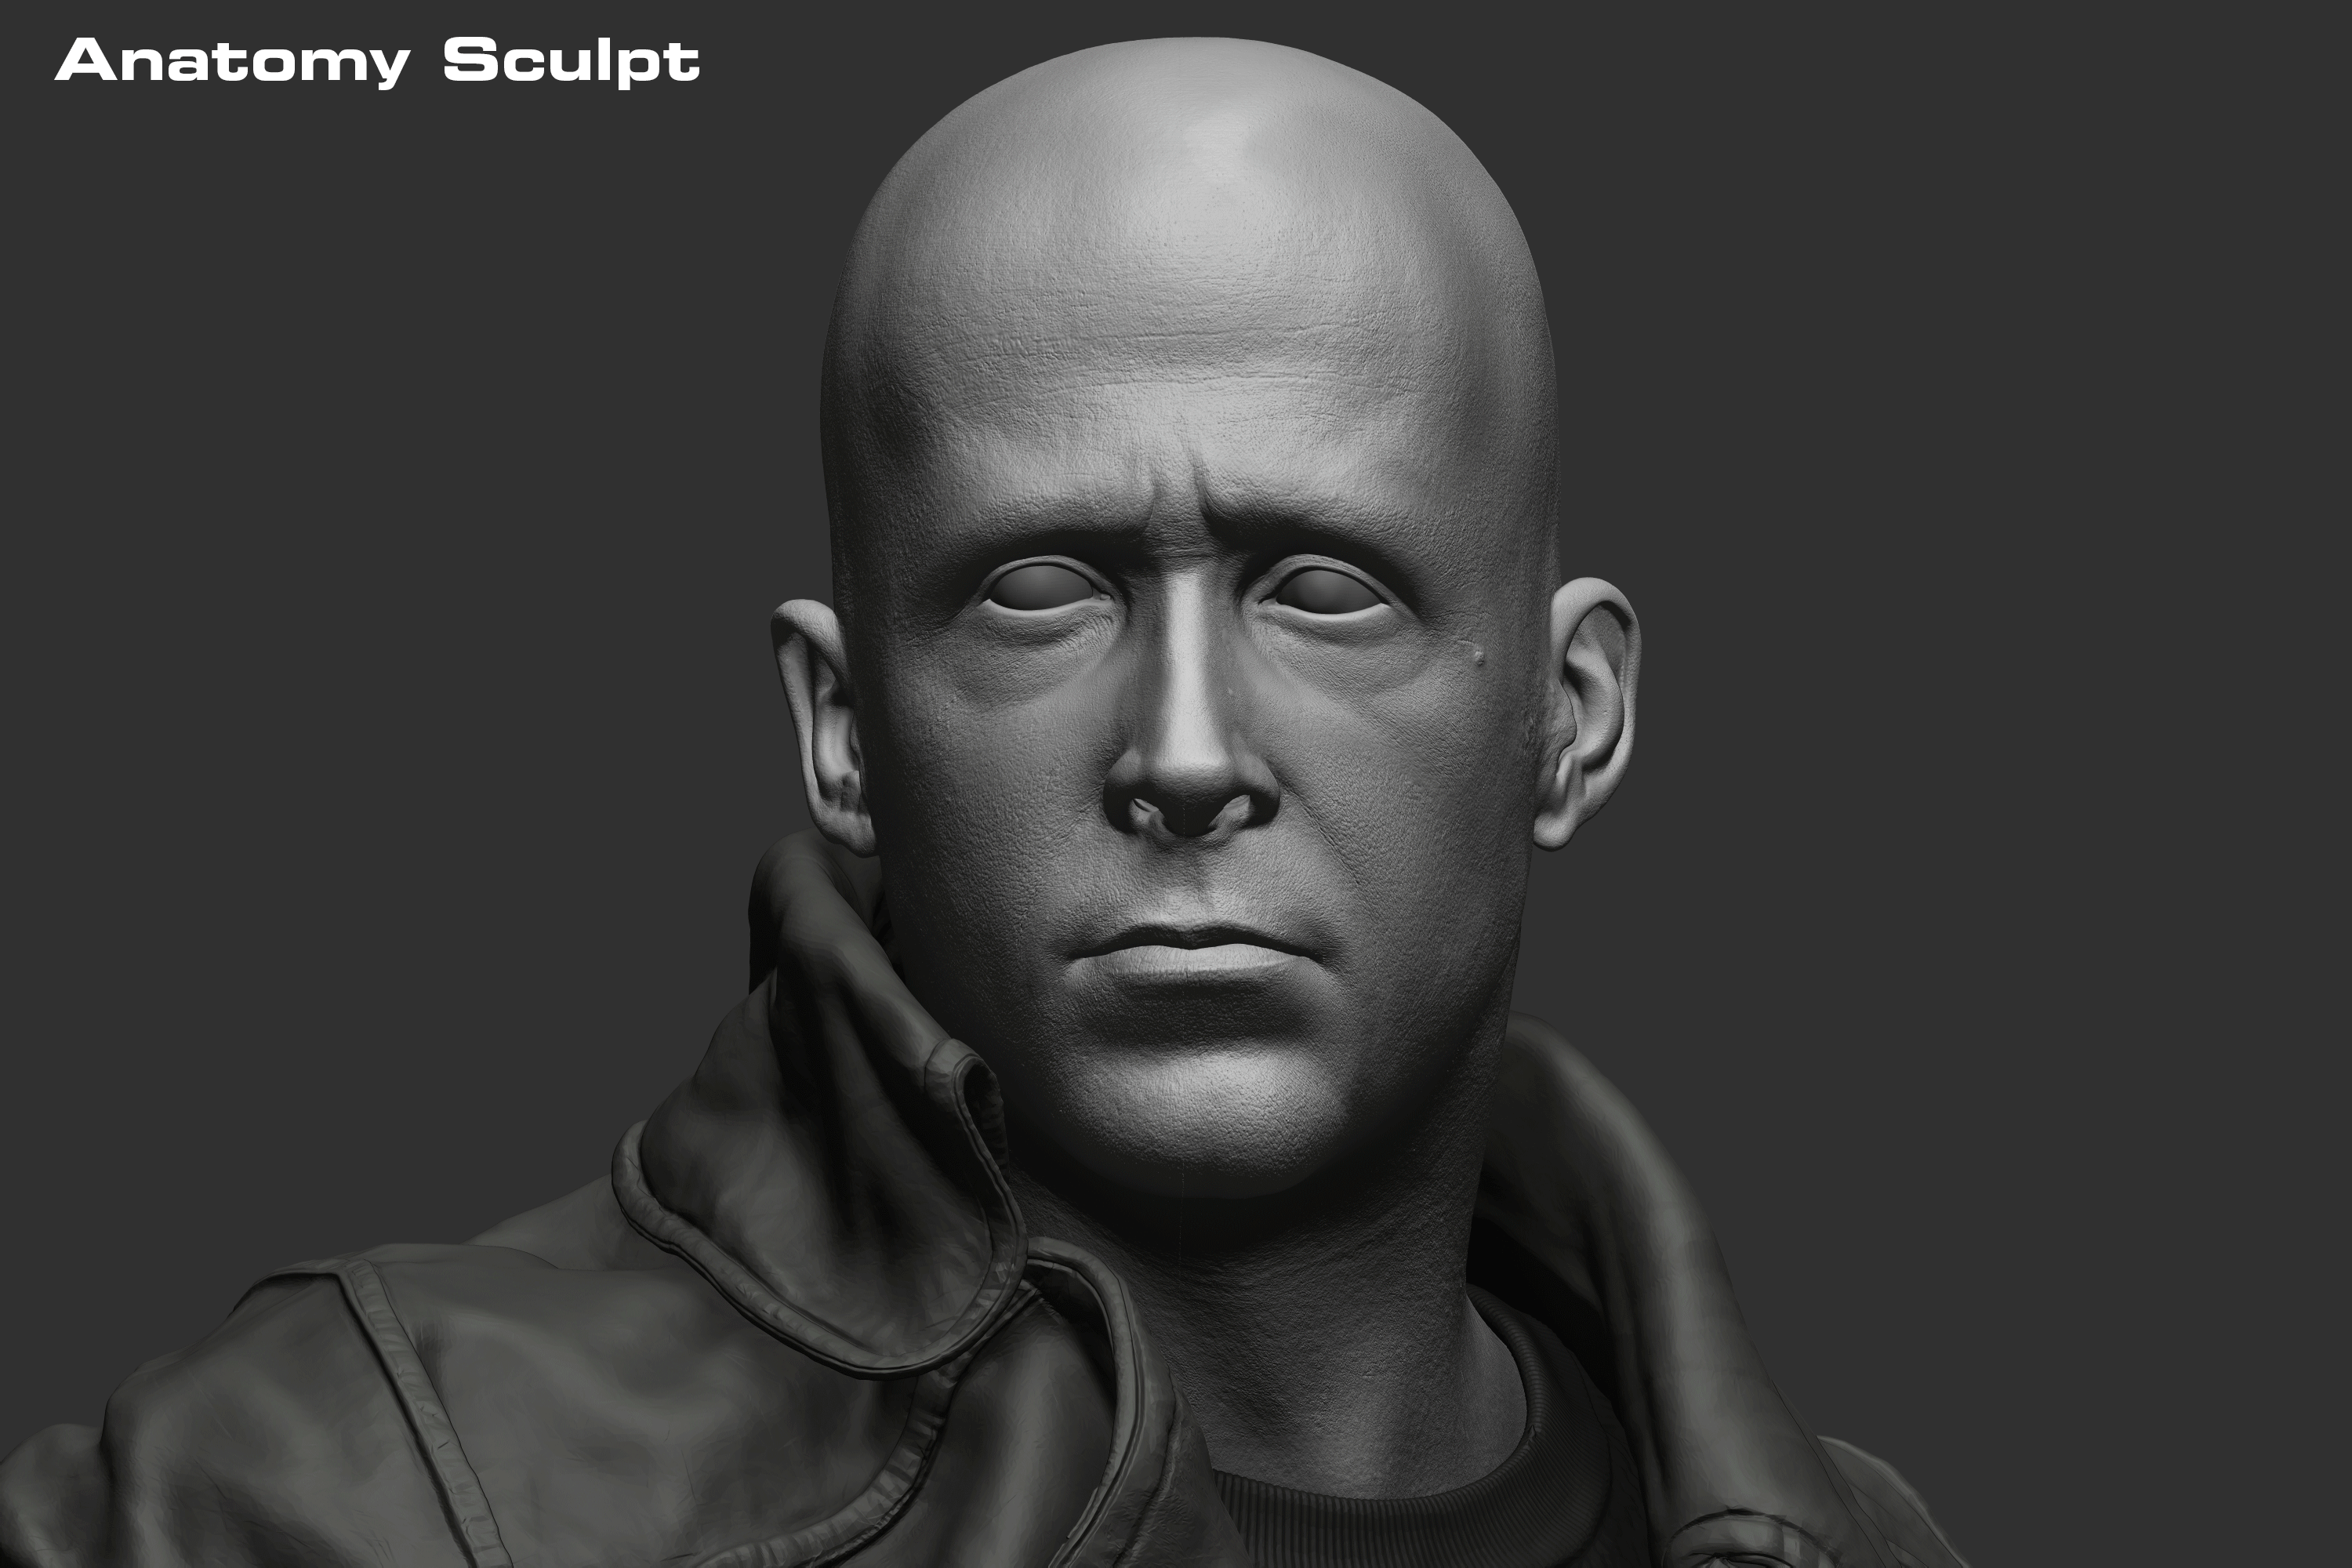 Zbrush Sculpt: Showing the initial anatomy study underneath the skin.